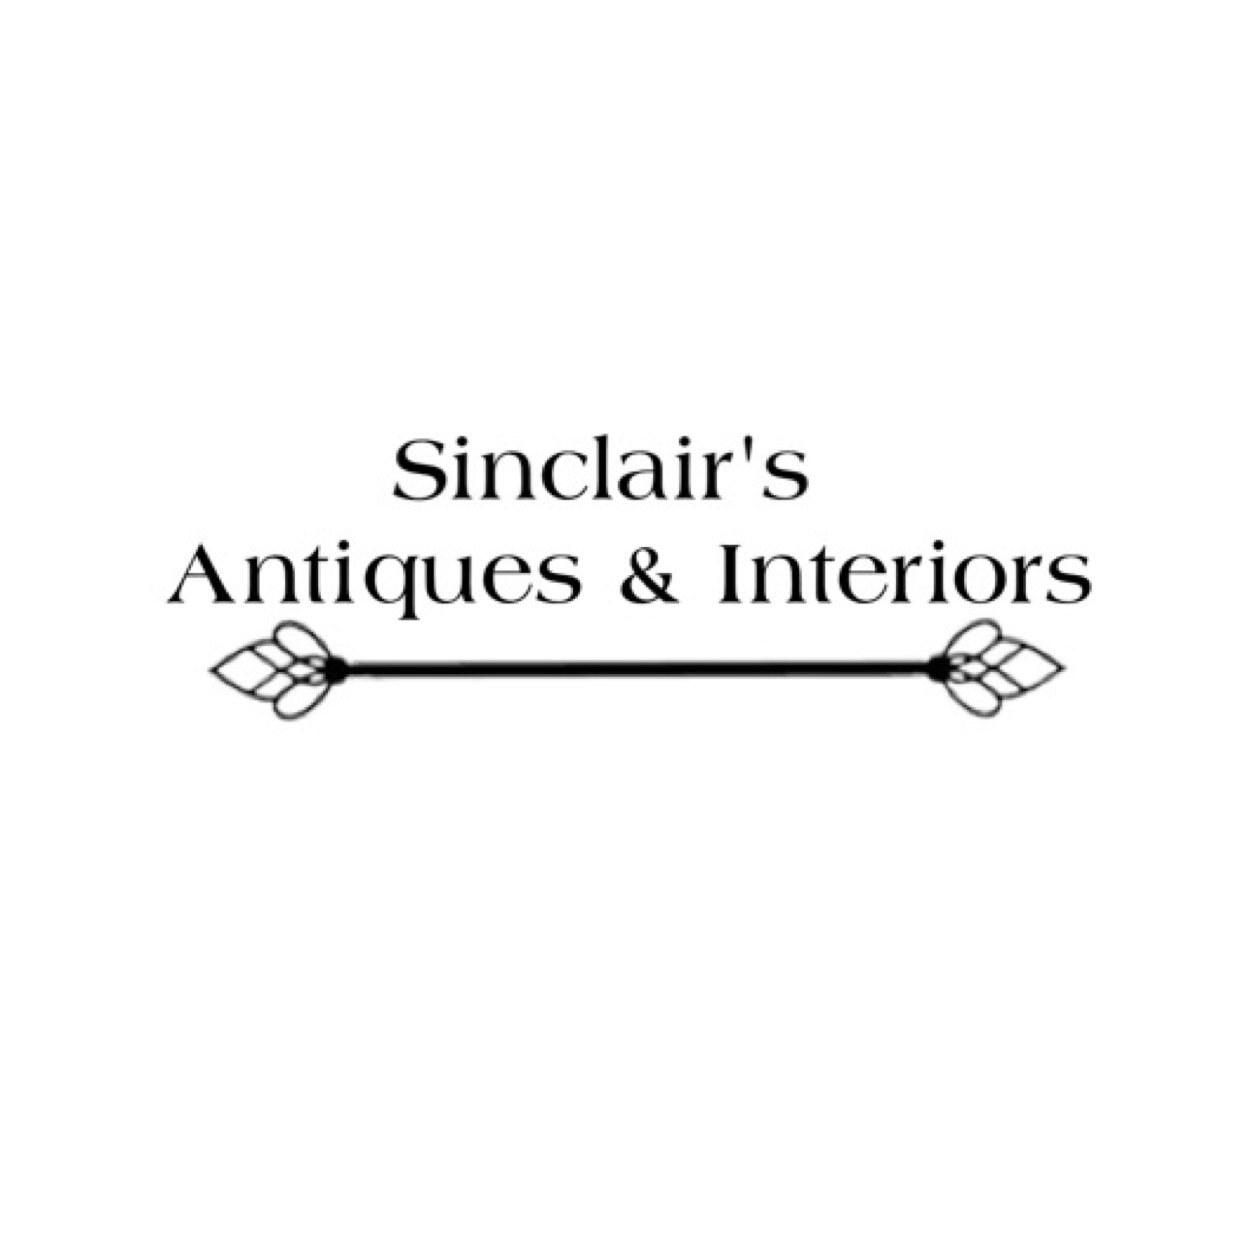 Sinclair's Antiques & Interiors. If you would like to make an appointment to come view our stock & Warehouse please call